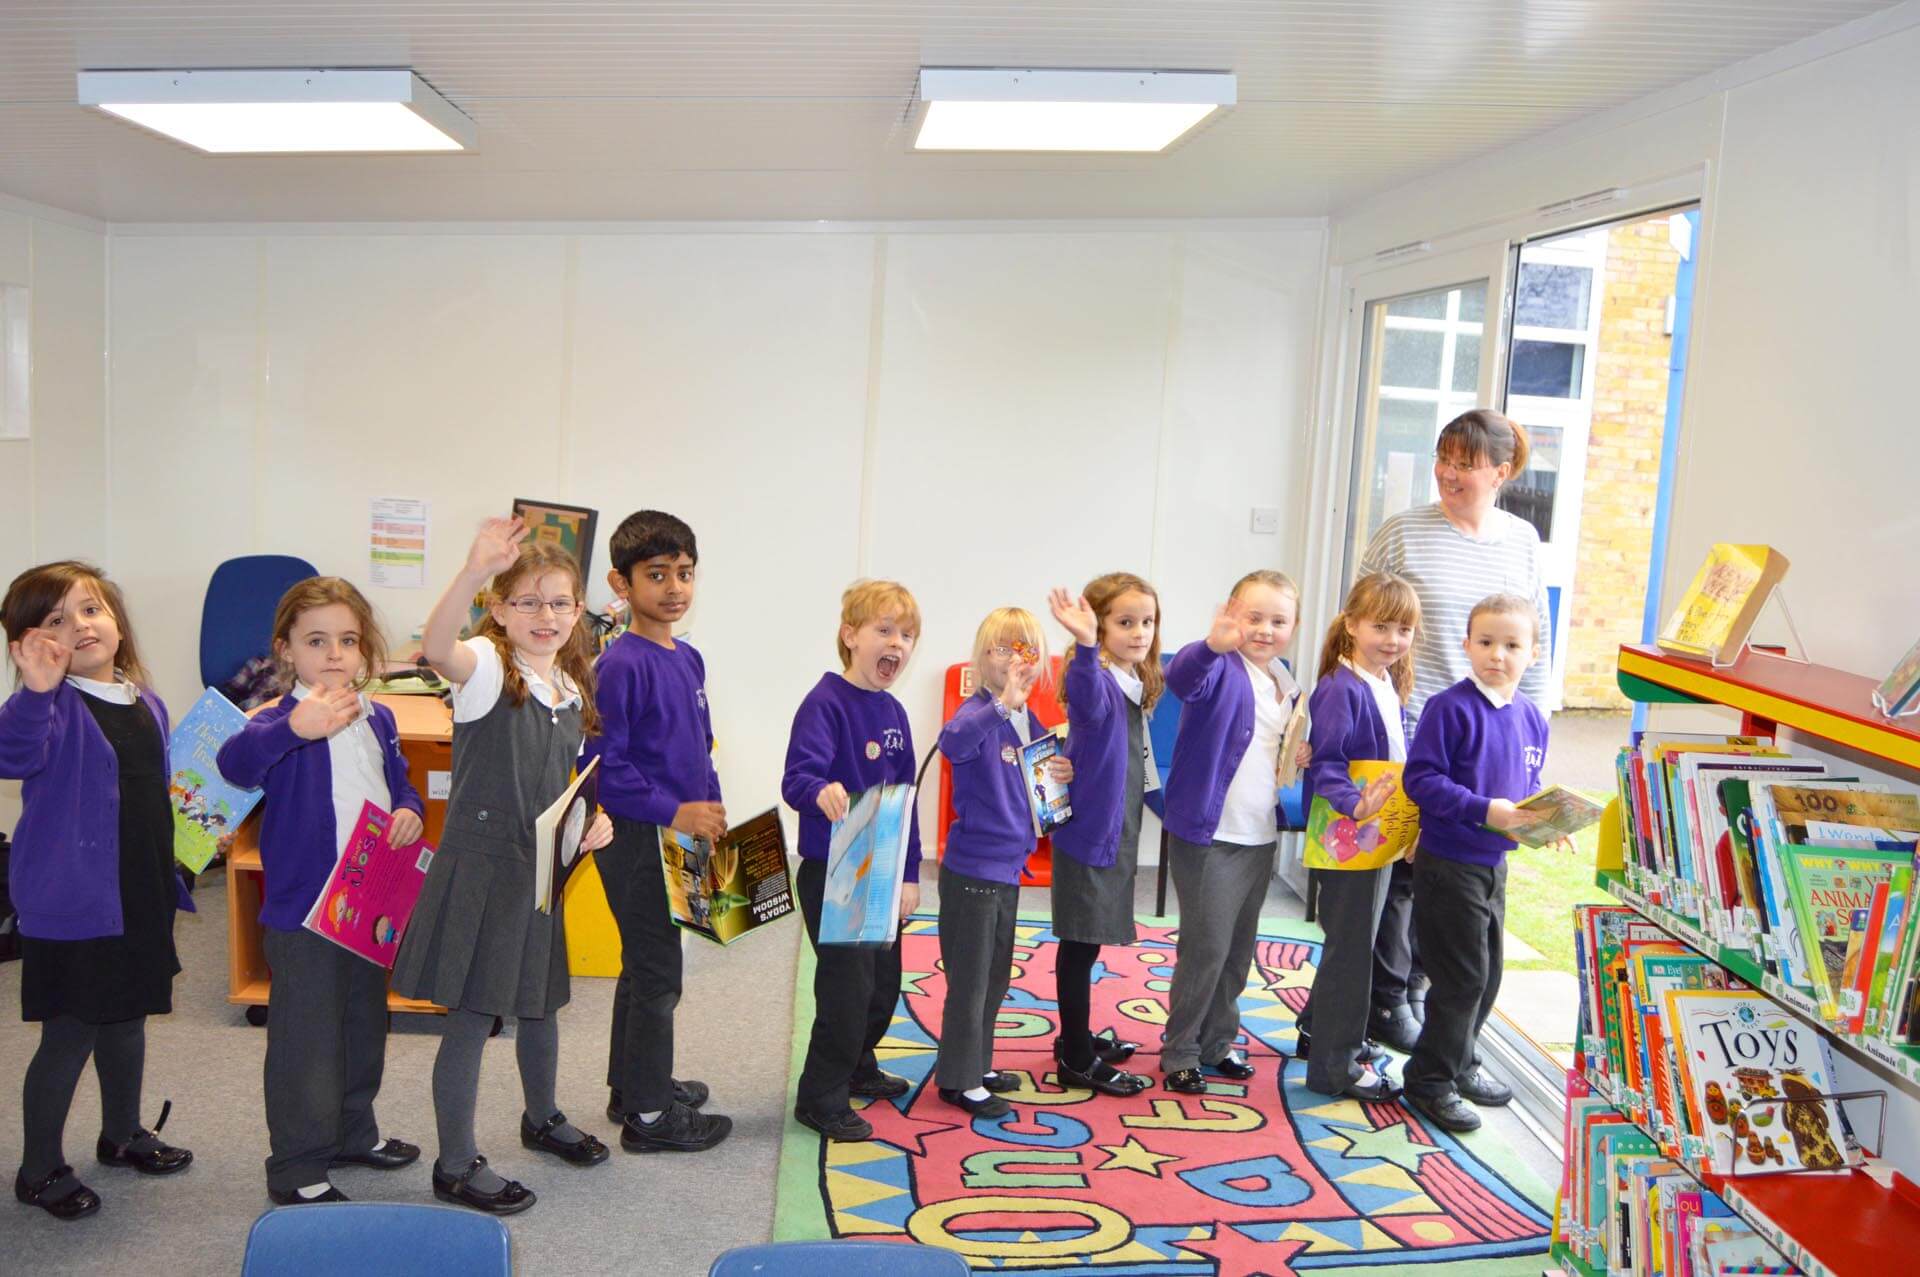 Children queueing up to leave their school library